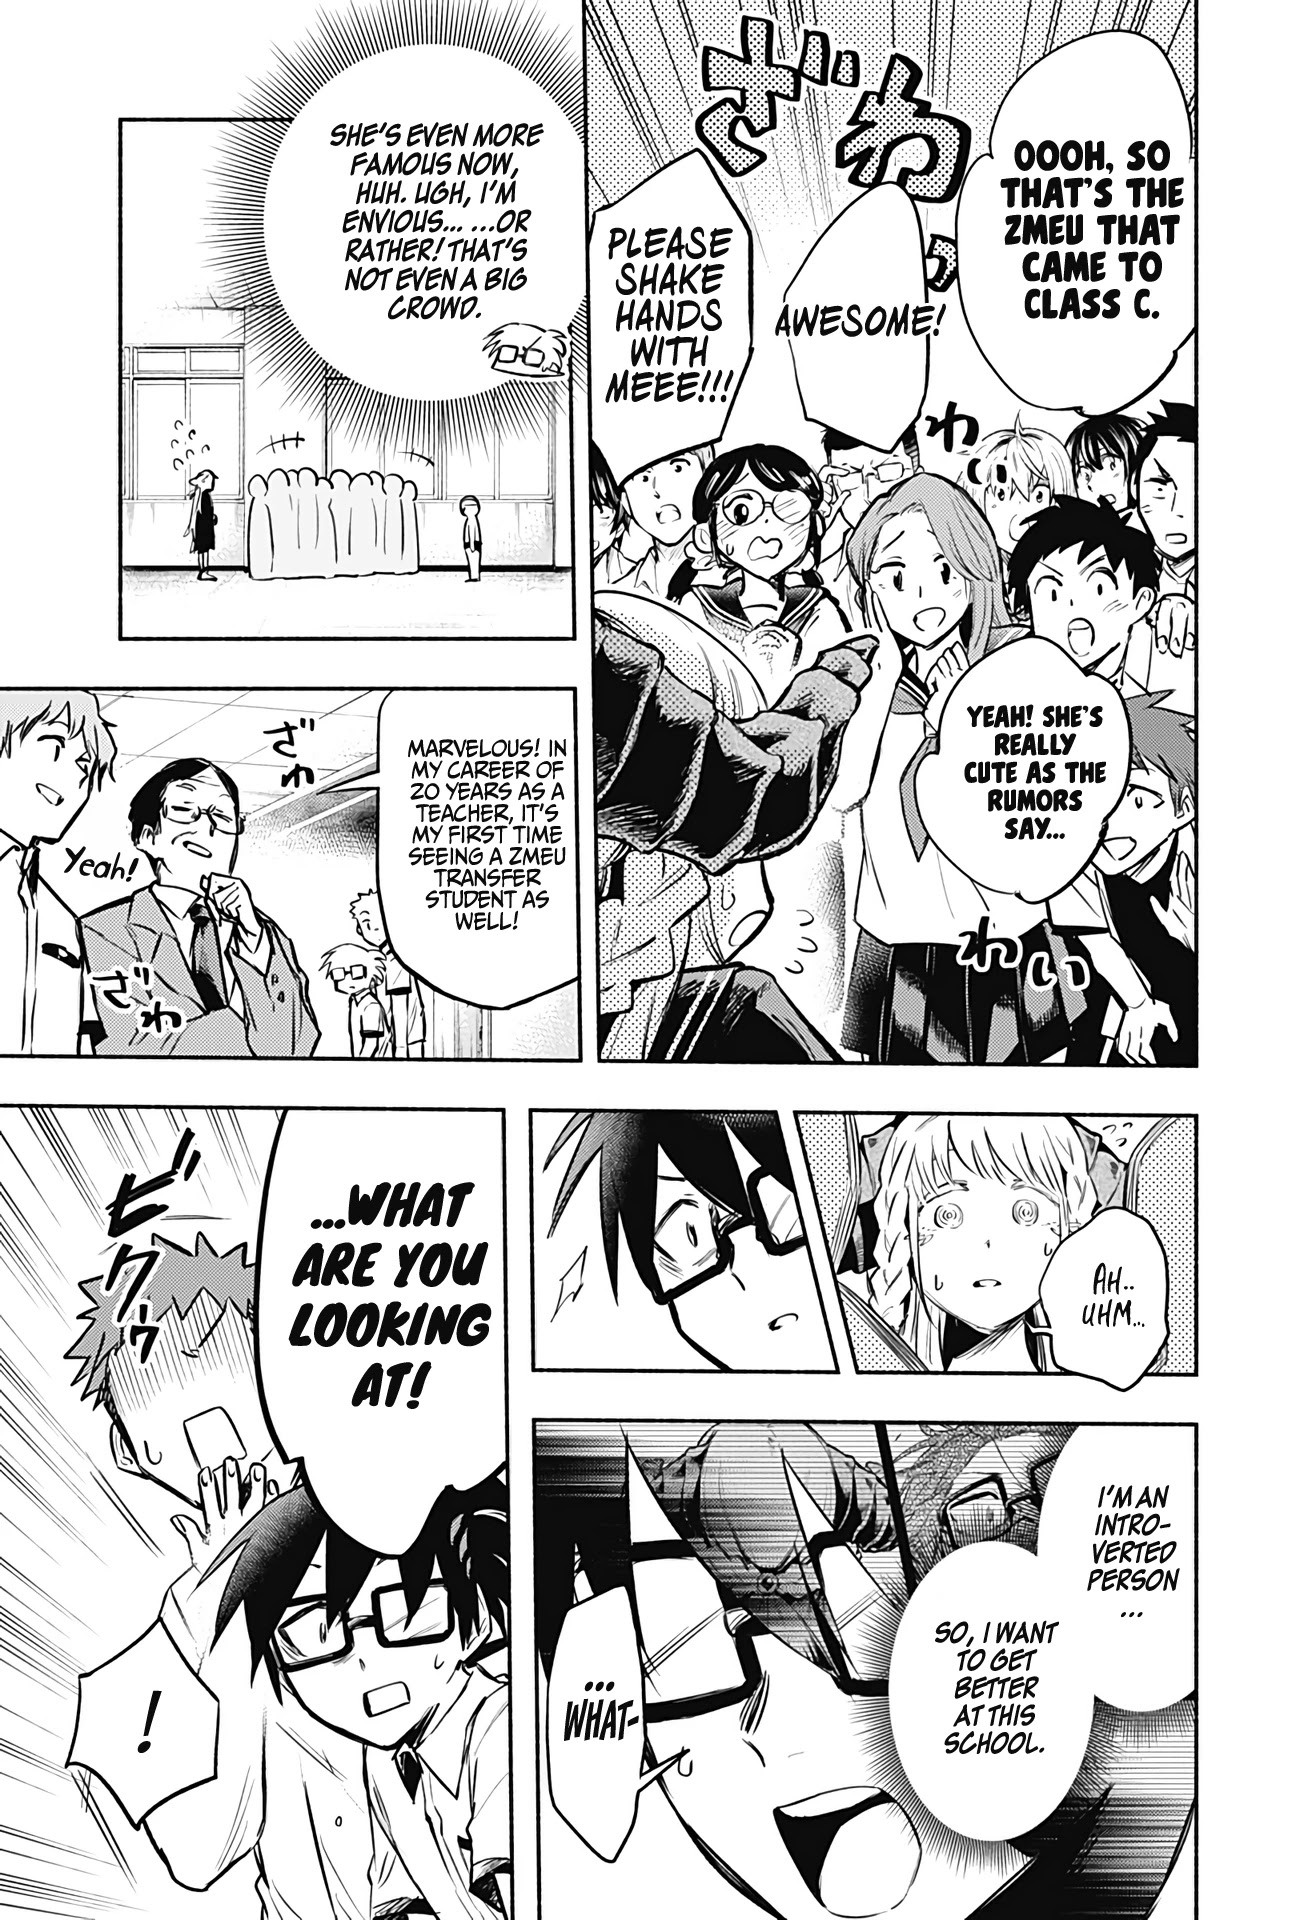 That Dragon (Exchange) Student Stands Out More Than Me Chapter 2 #10